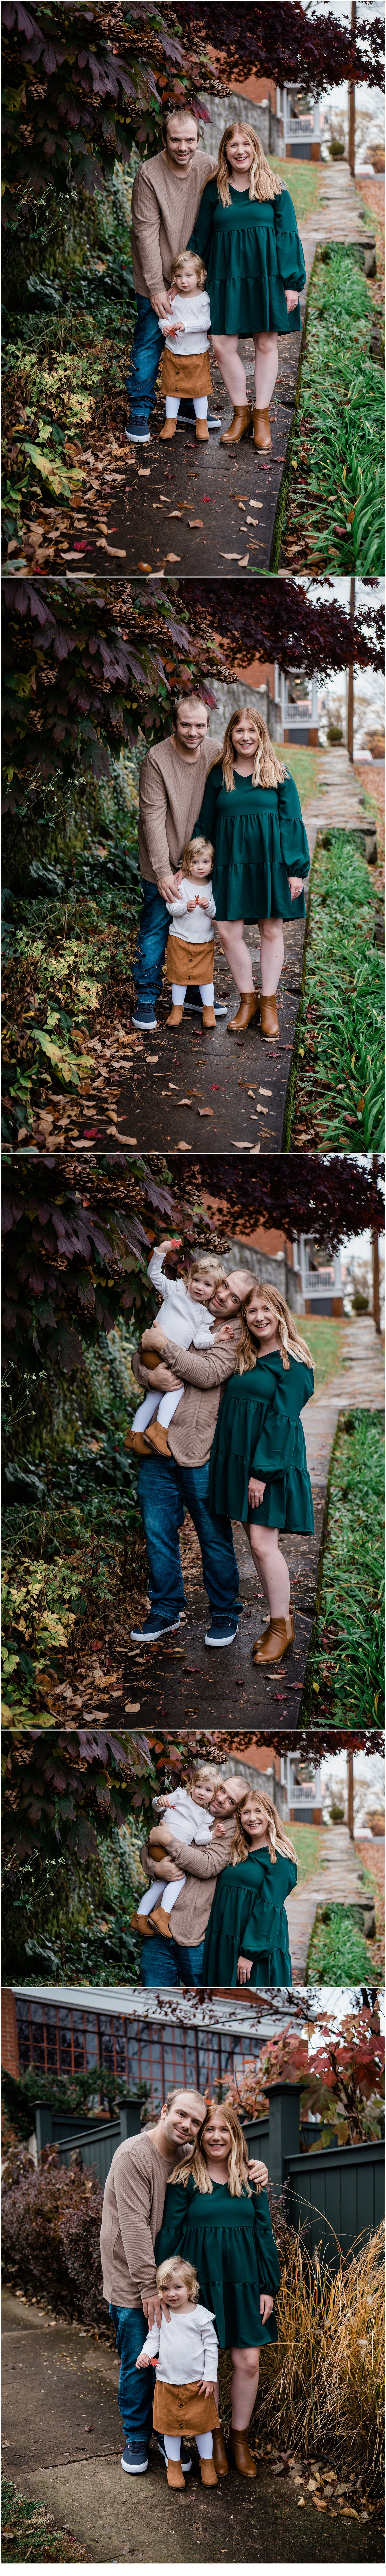 Shepherdstown West Virginia Fall Mini Photography Session